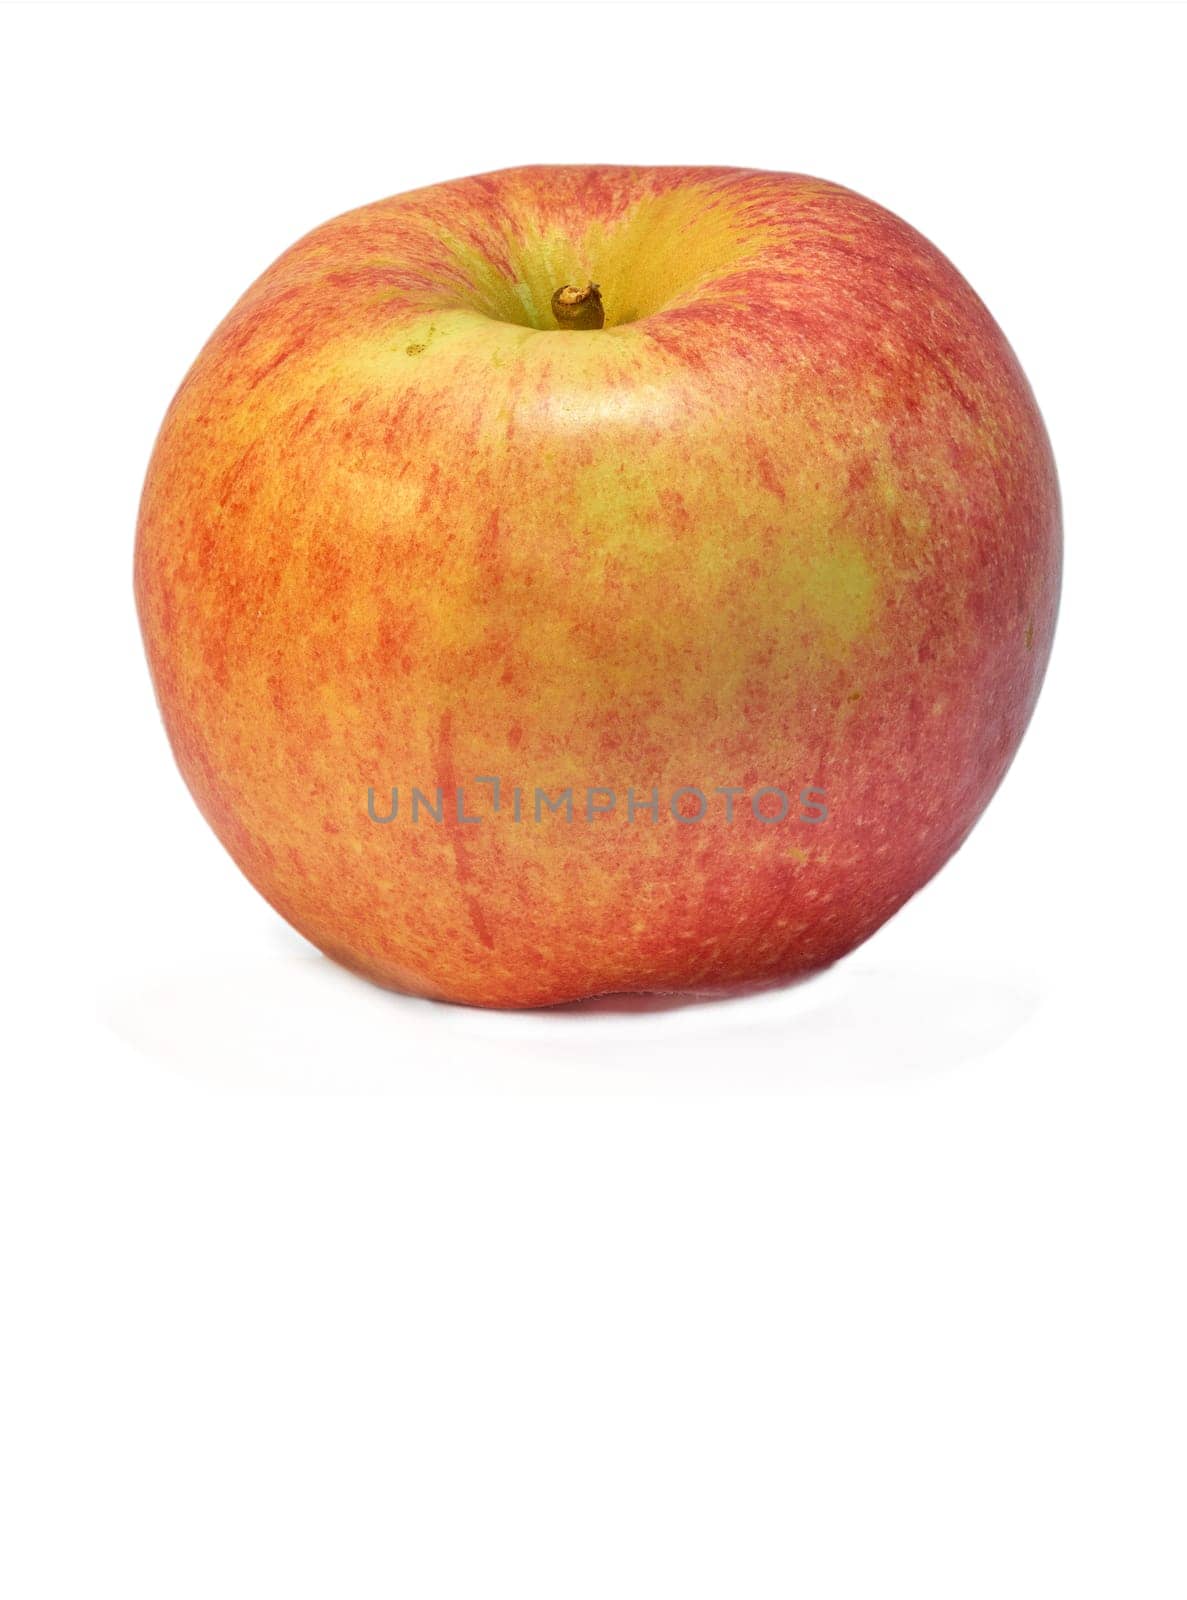 Red apple, nutrition and diet with health, wellness and organic vitamins and snack. Fruit, plant and harvest with botanical produce, horticulture and spring vegetation isolated on white background.